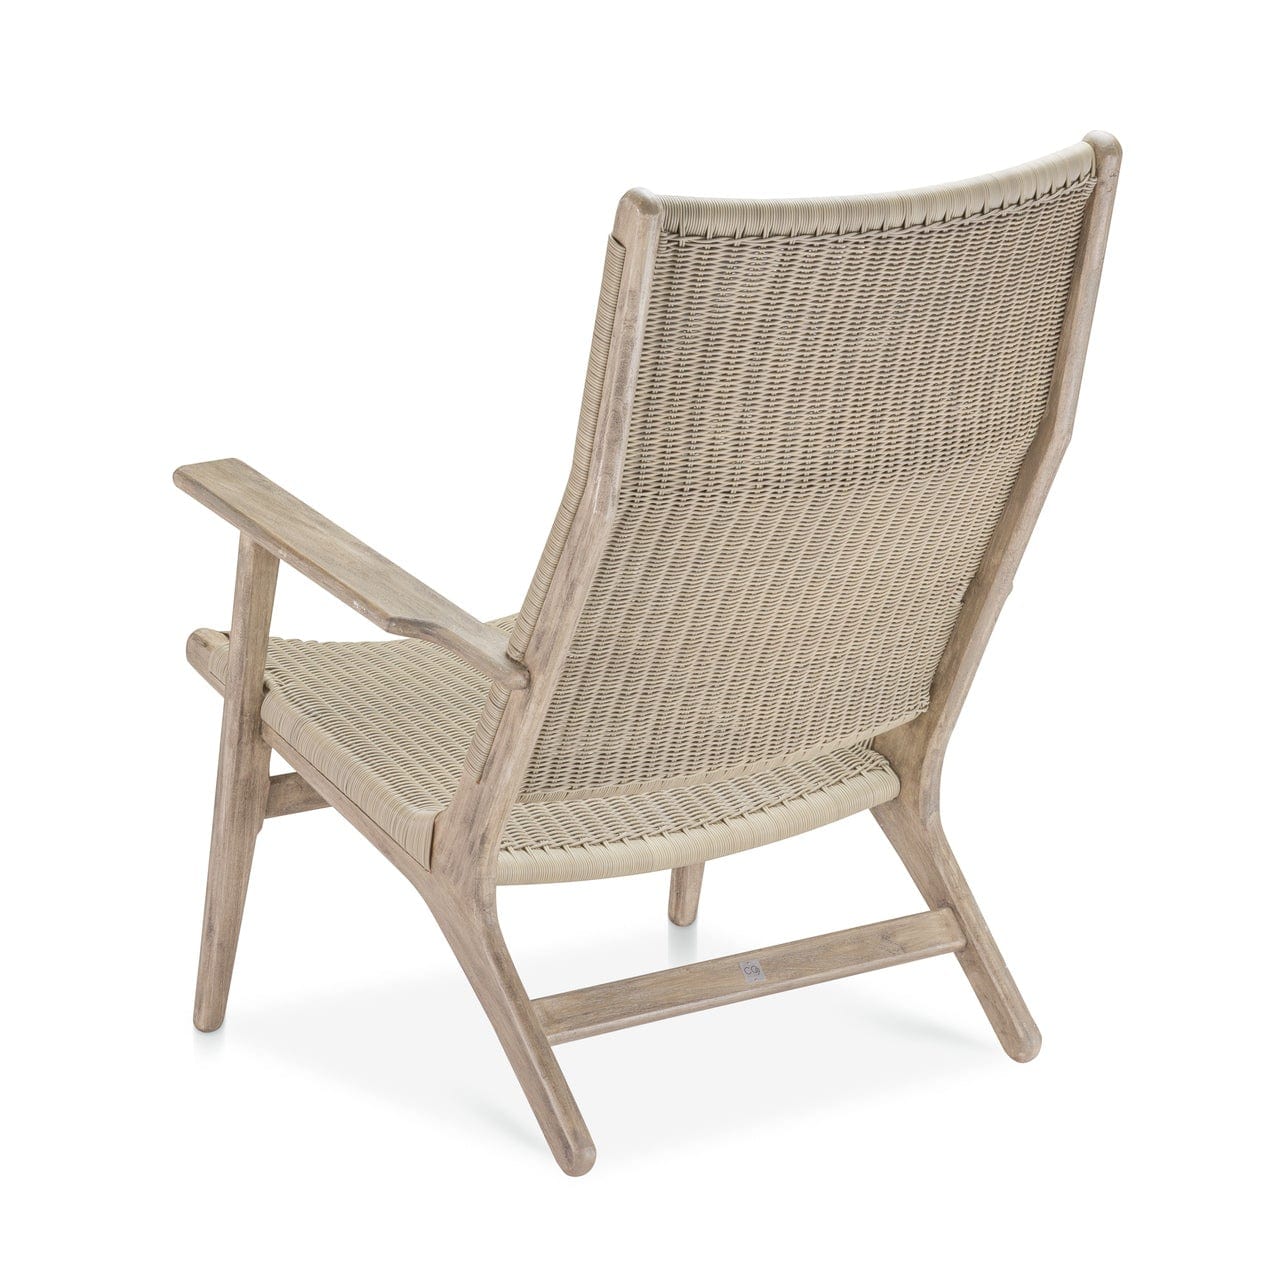 CO9 Design Adirondack Chairs Dover Adirondack Chair - Include Color